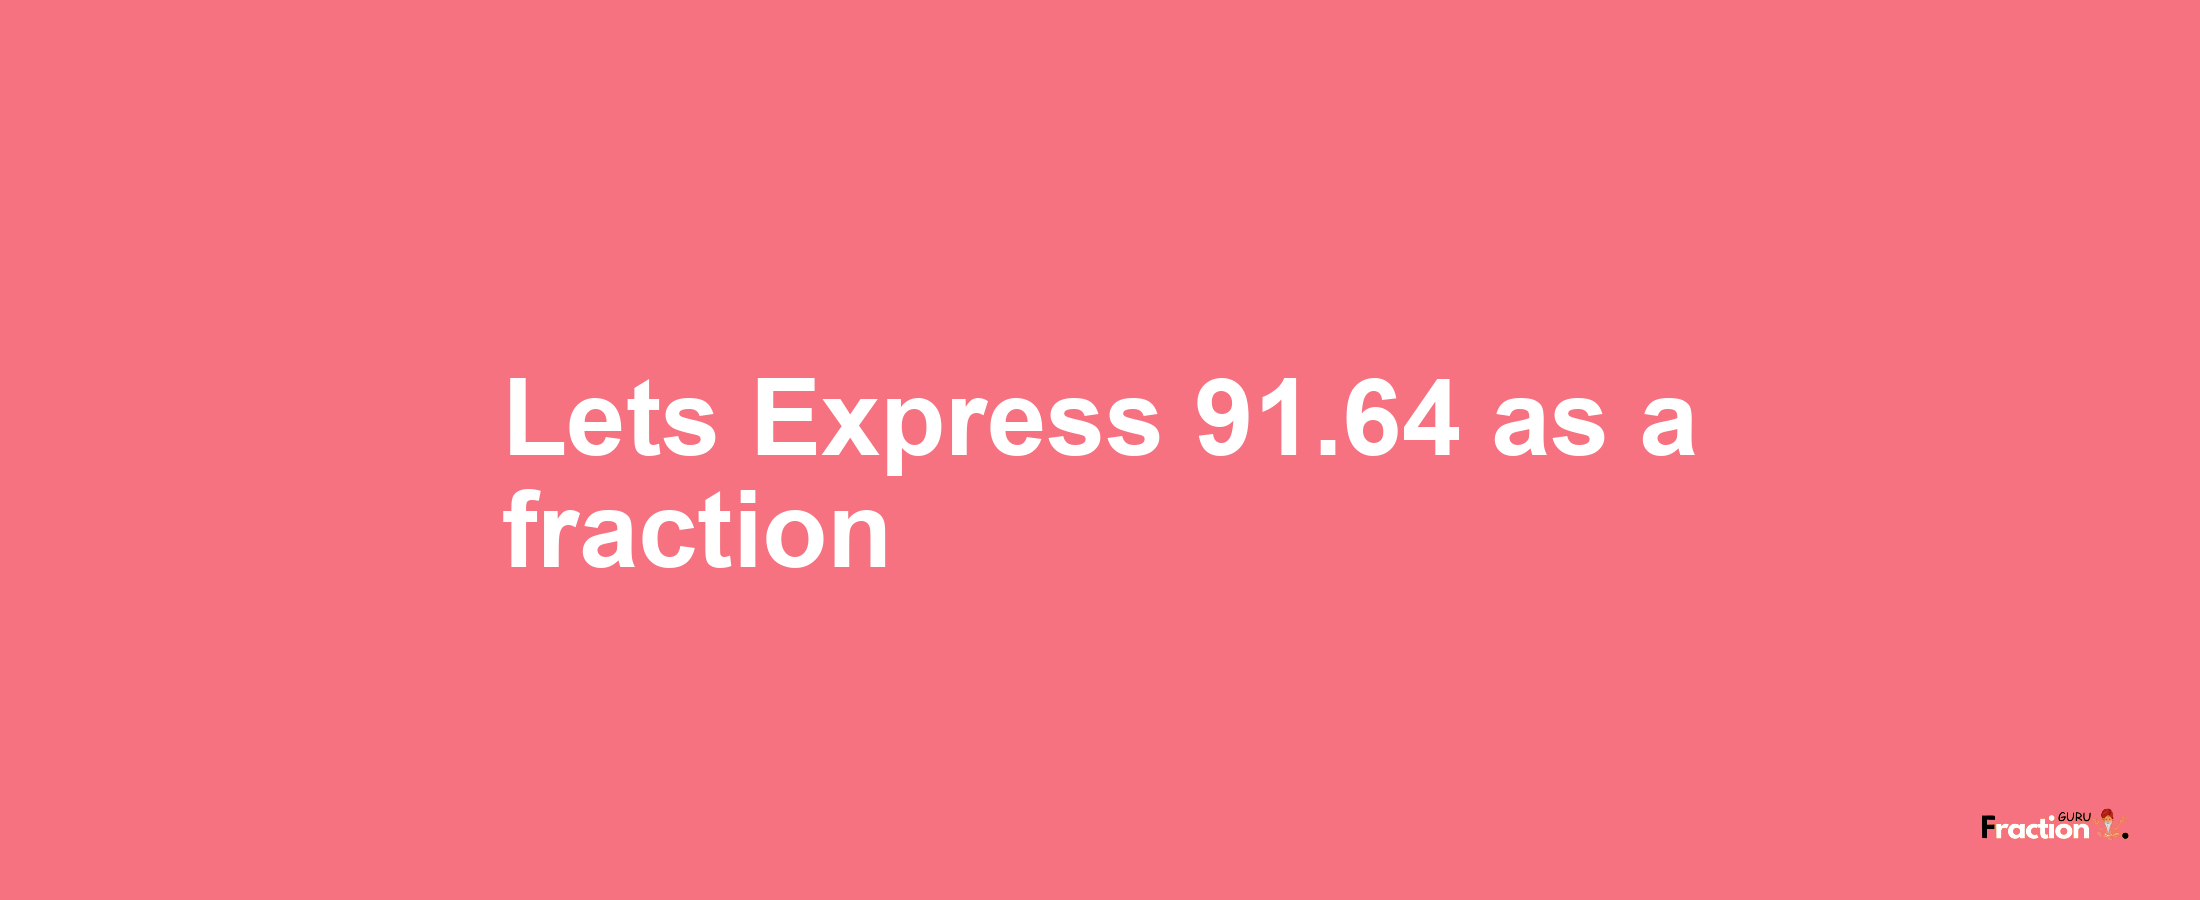 Lets Express 91.64 as afraction